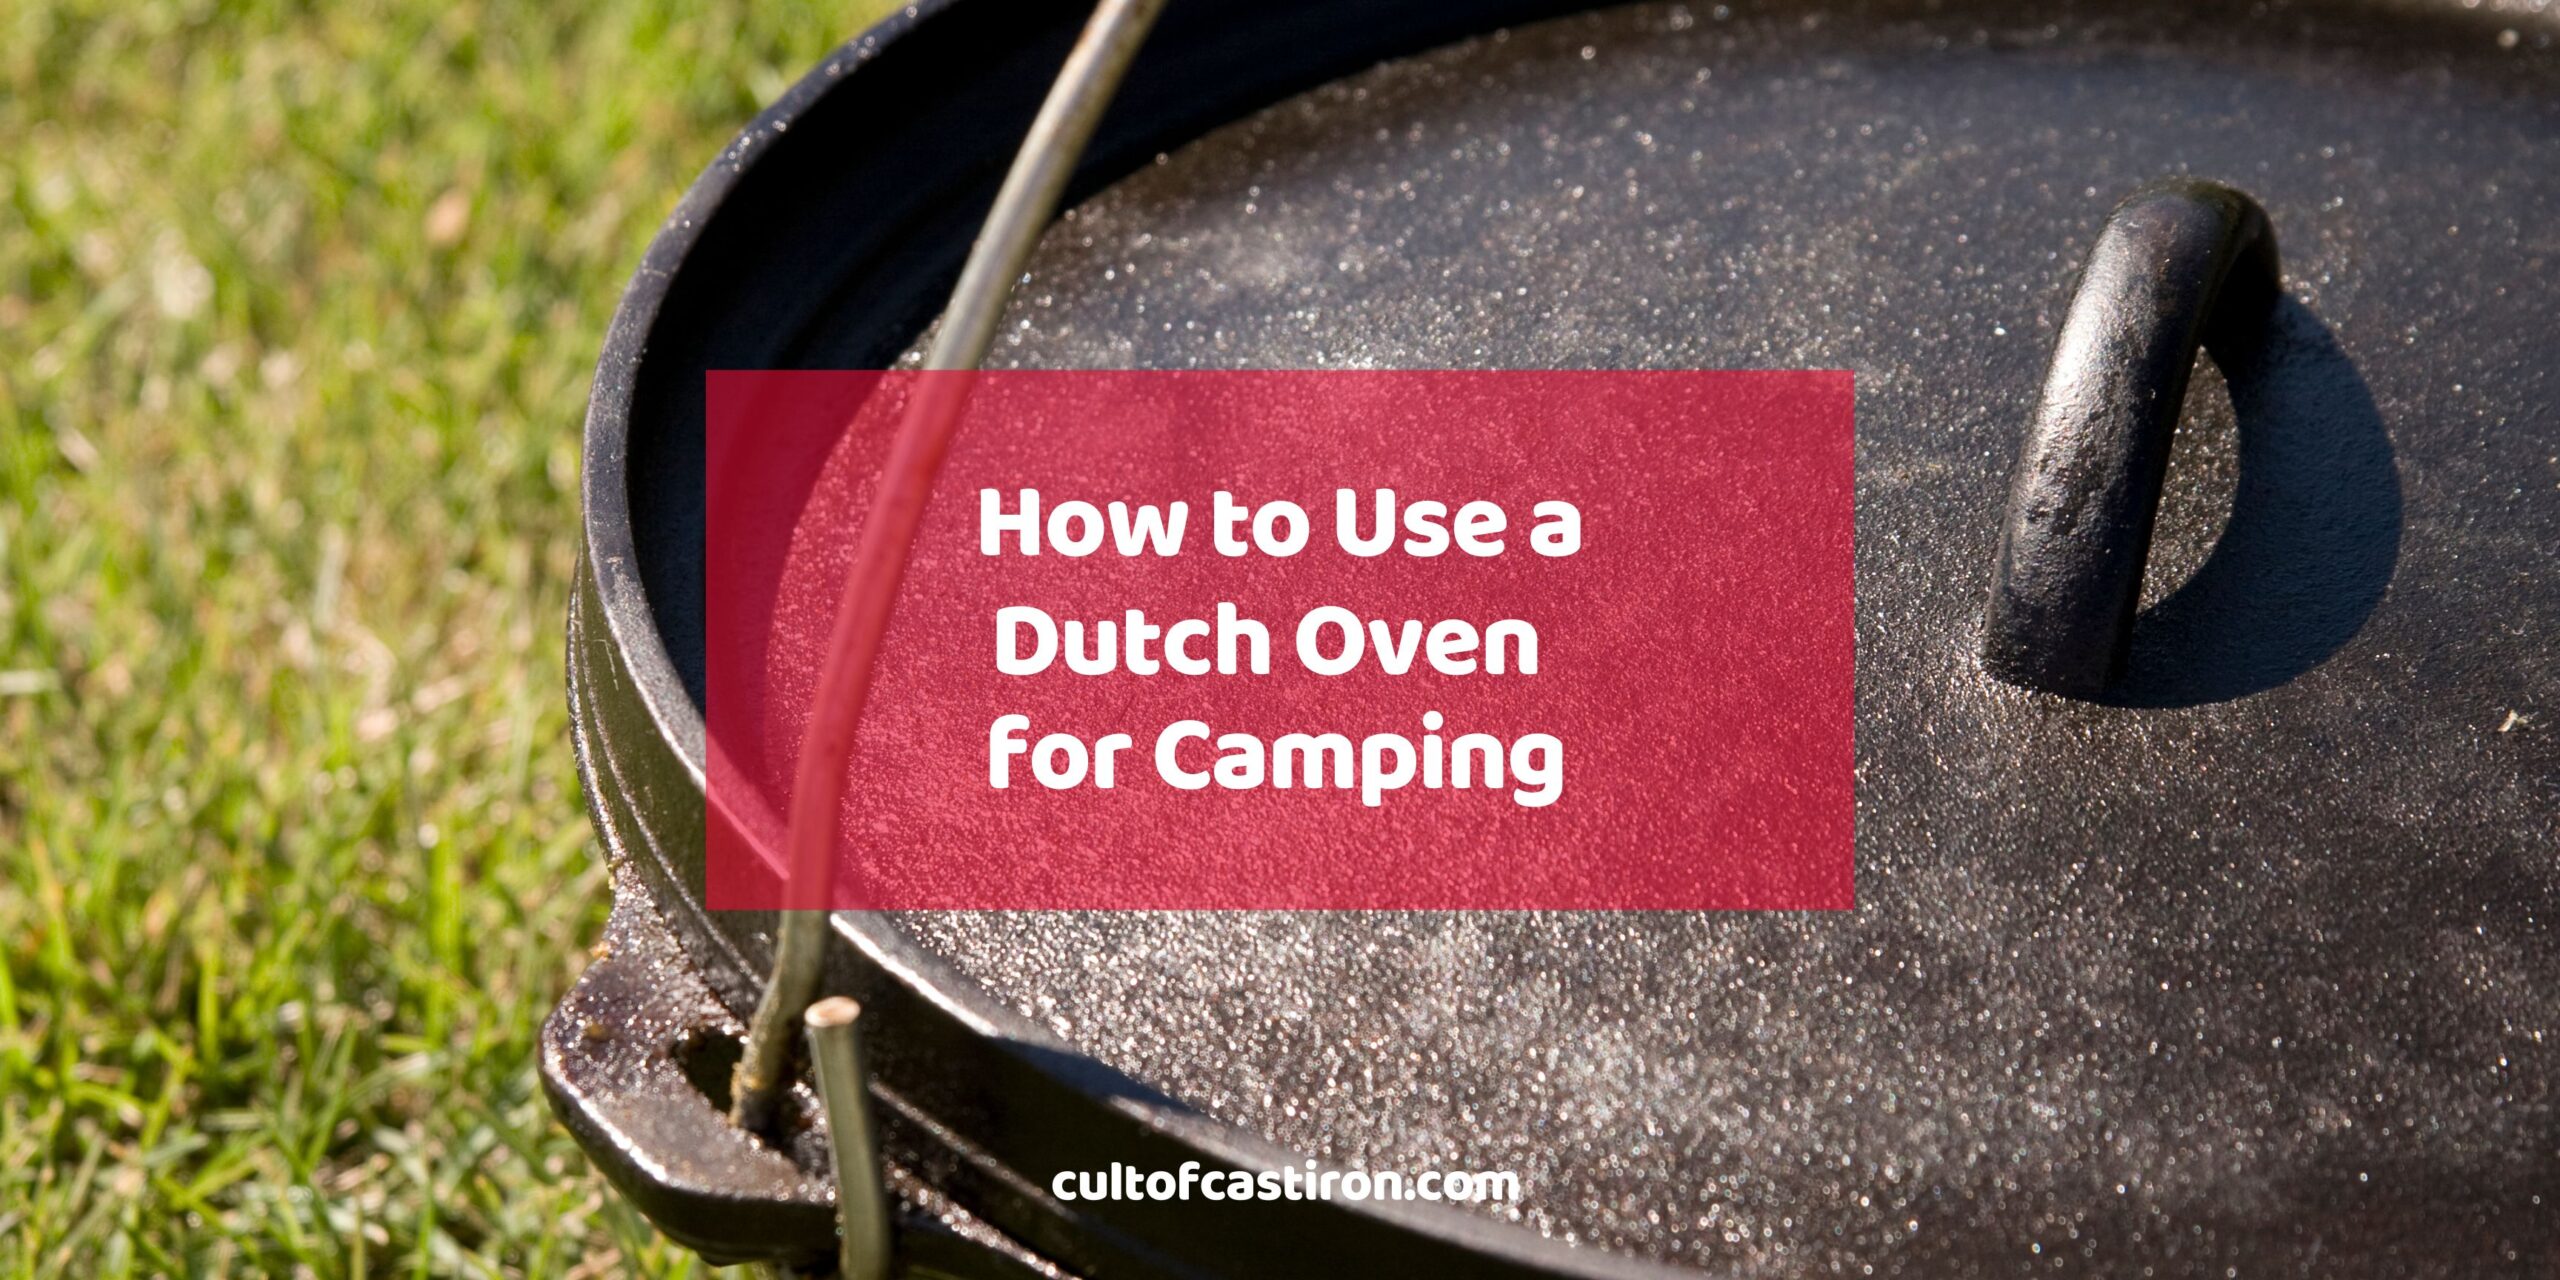 https://cultofcastiron.com/wp-content/uploads/2023/10/how-to-use-a-dutch-oven-for-camping-banner-scaled.jpg